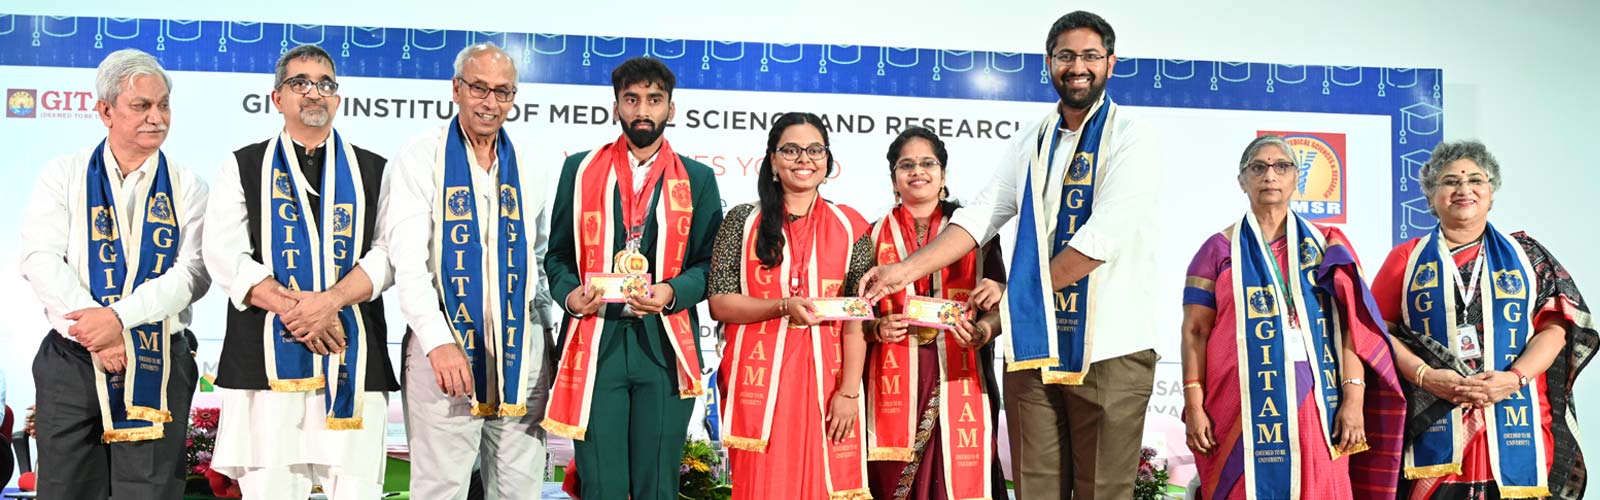 GITAM Institute of Medical Sciences and Research_Ceremony